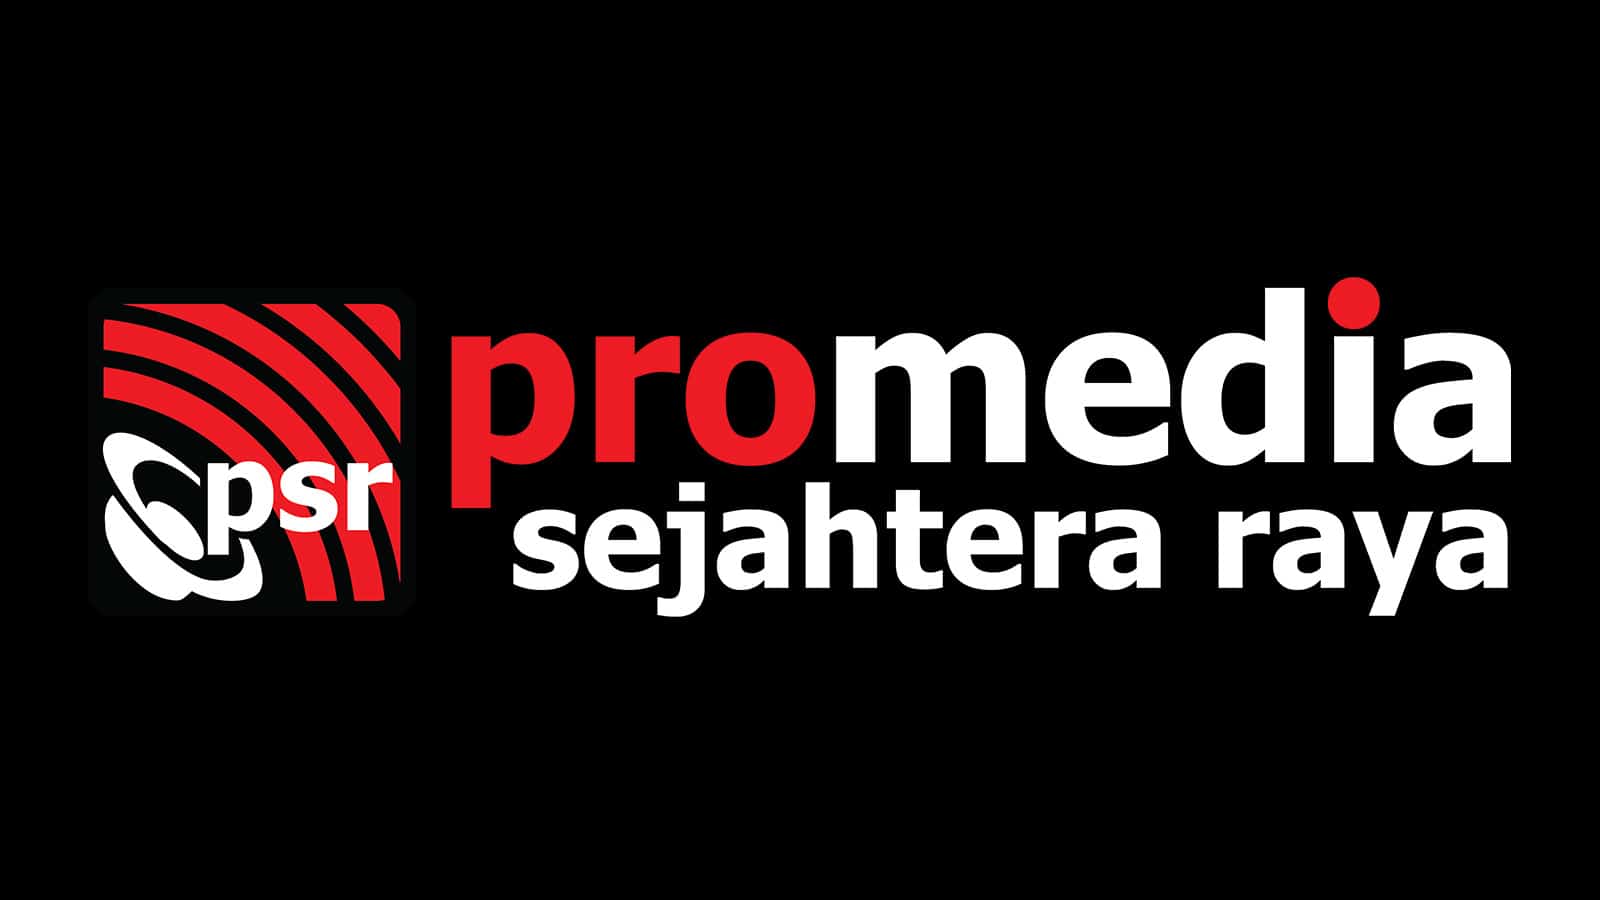 Meyer Sound Names PT. Promedia Sejahtera Raya as New Distributor in Indonesia 